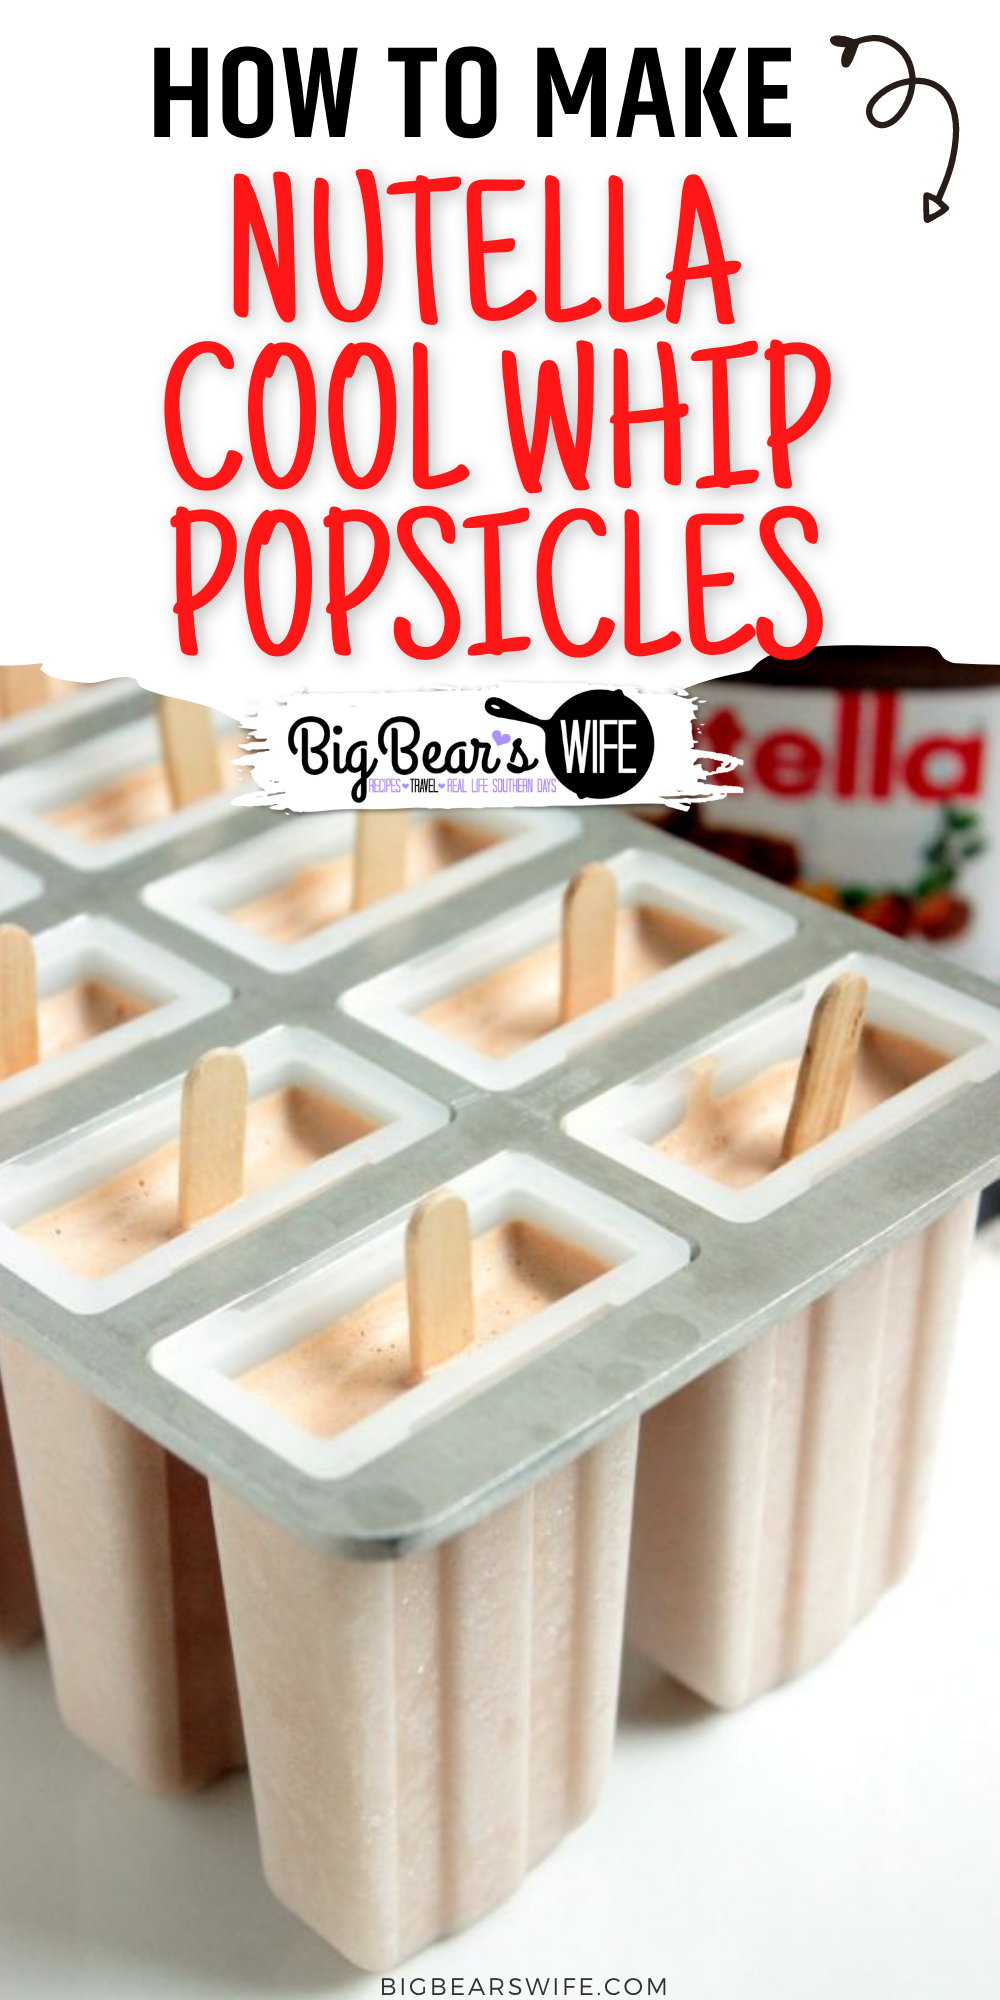   2 ingredient Nutella Cool Whip Popsicles are what you need to cool off during these hot summer days! Whip them together for a great frozen treat! via @bigbearswife